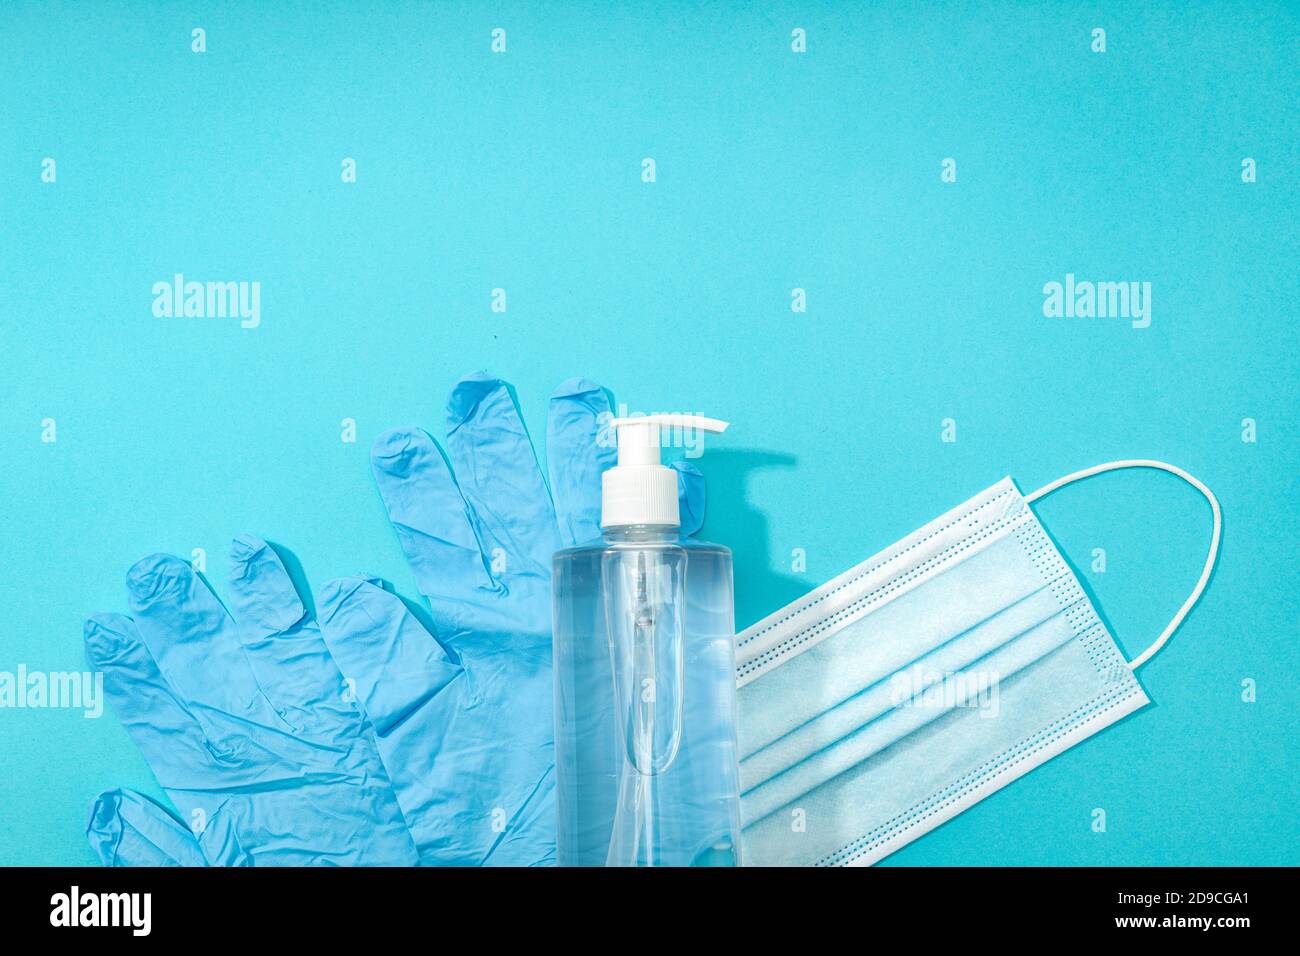 Covid-19 coronavirus protection or prevention concept. Medical face mask, gloves and hand sanitizer on blue background. Top view. Copy space Stock Photo